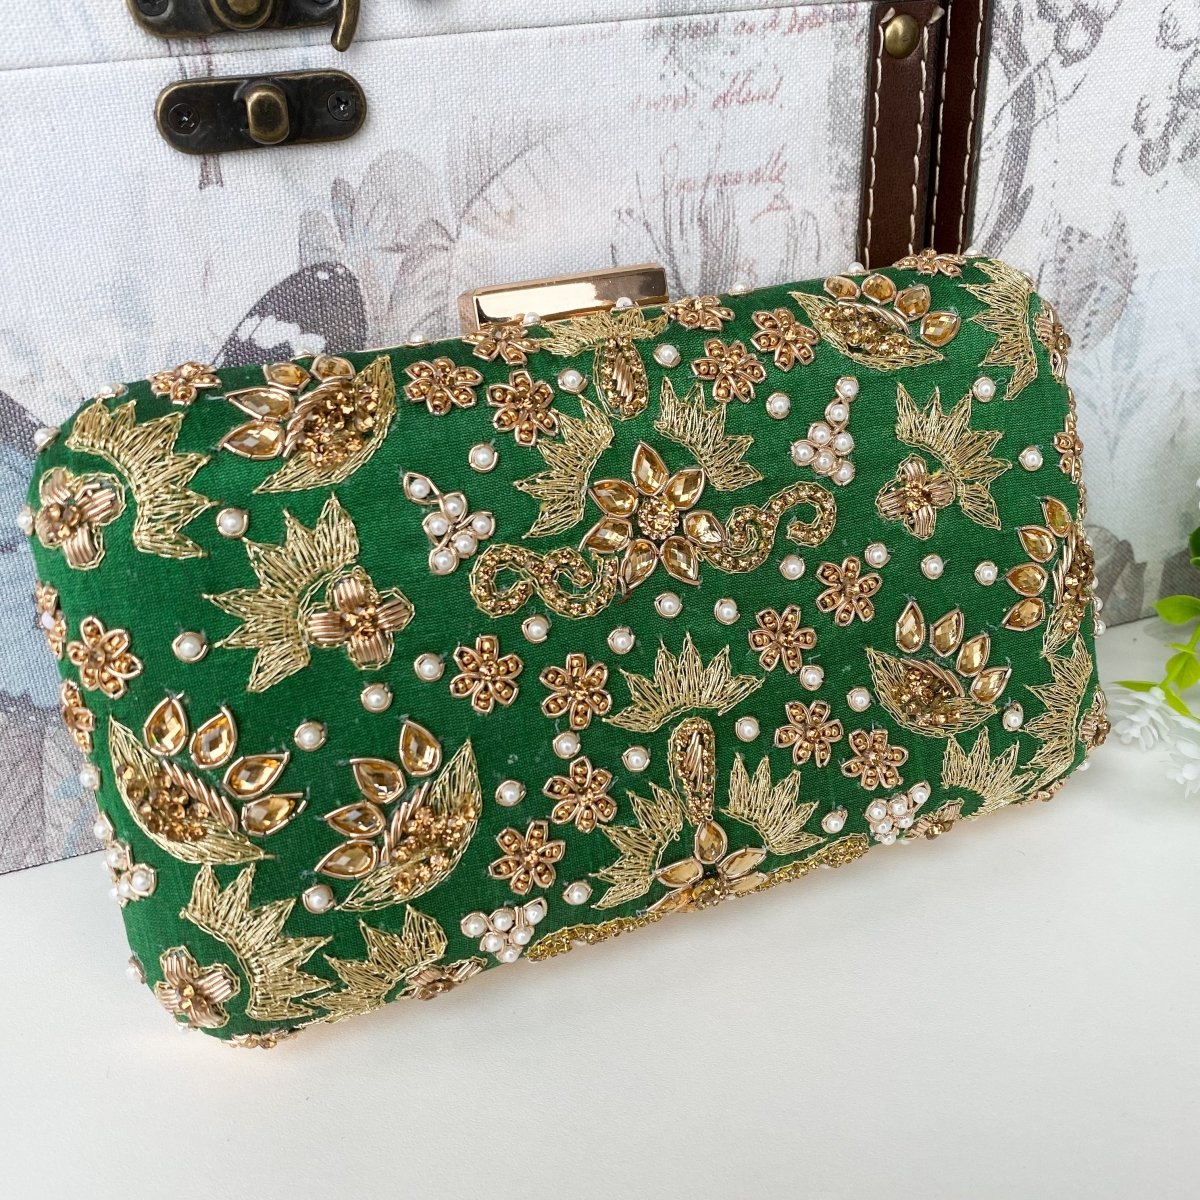 Green and Golden Unique Party Clutch - Stylish Accessories